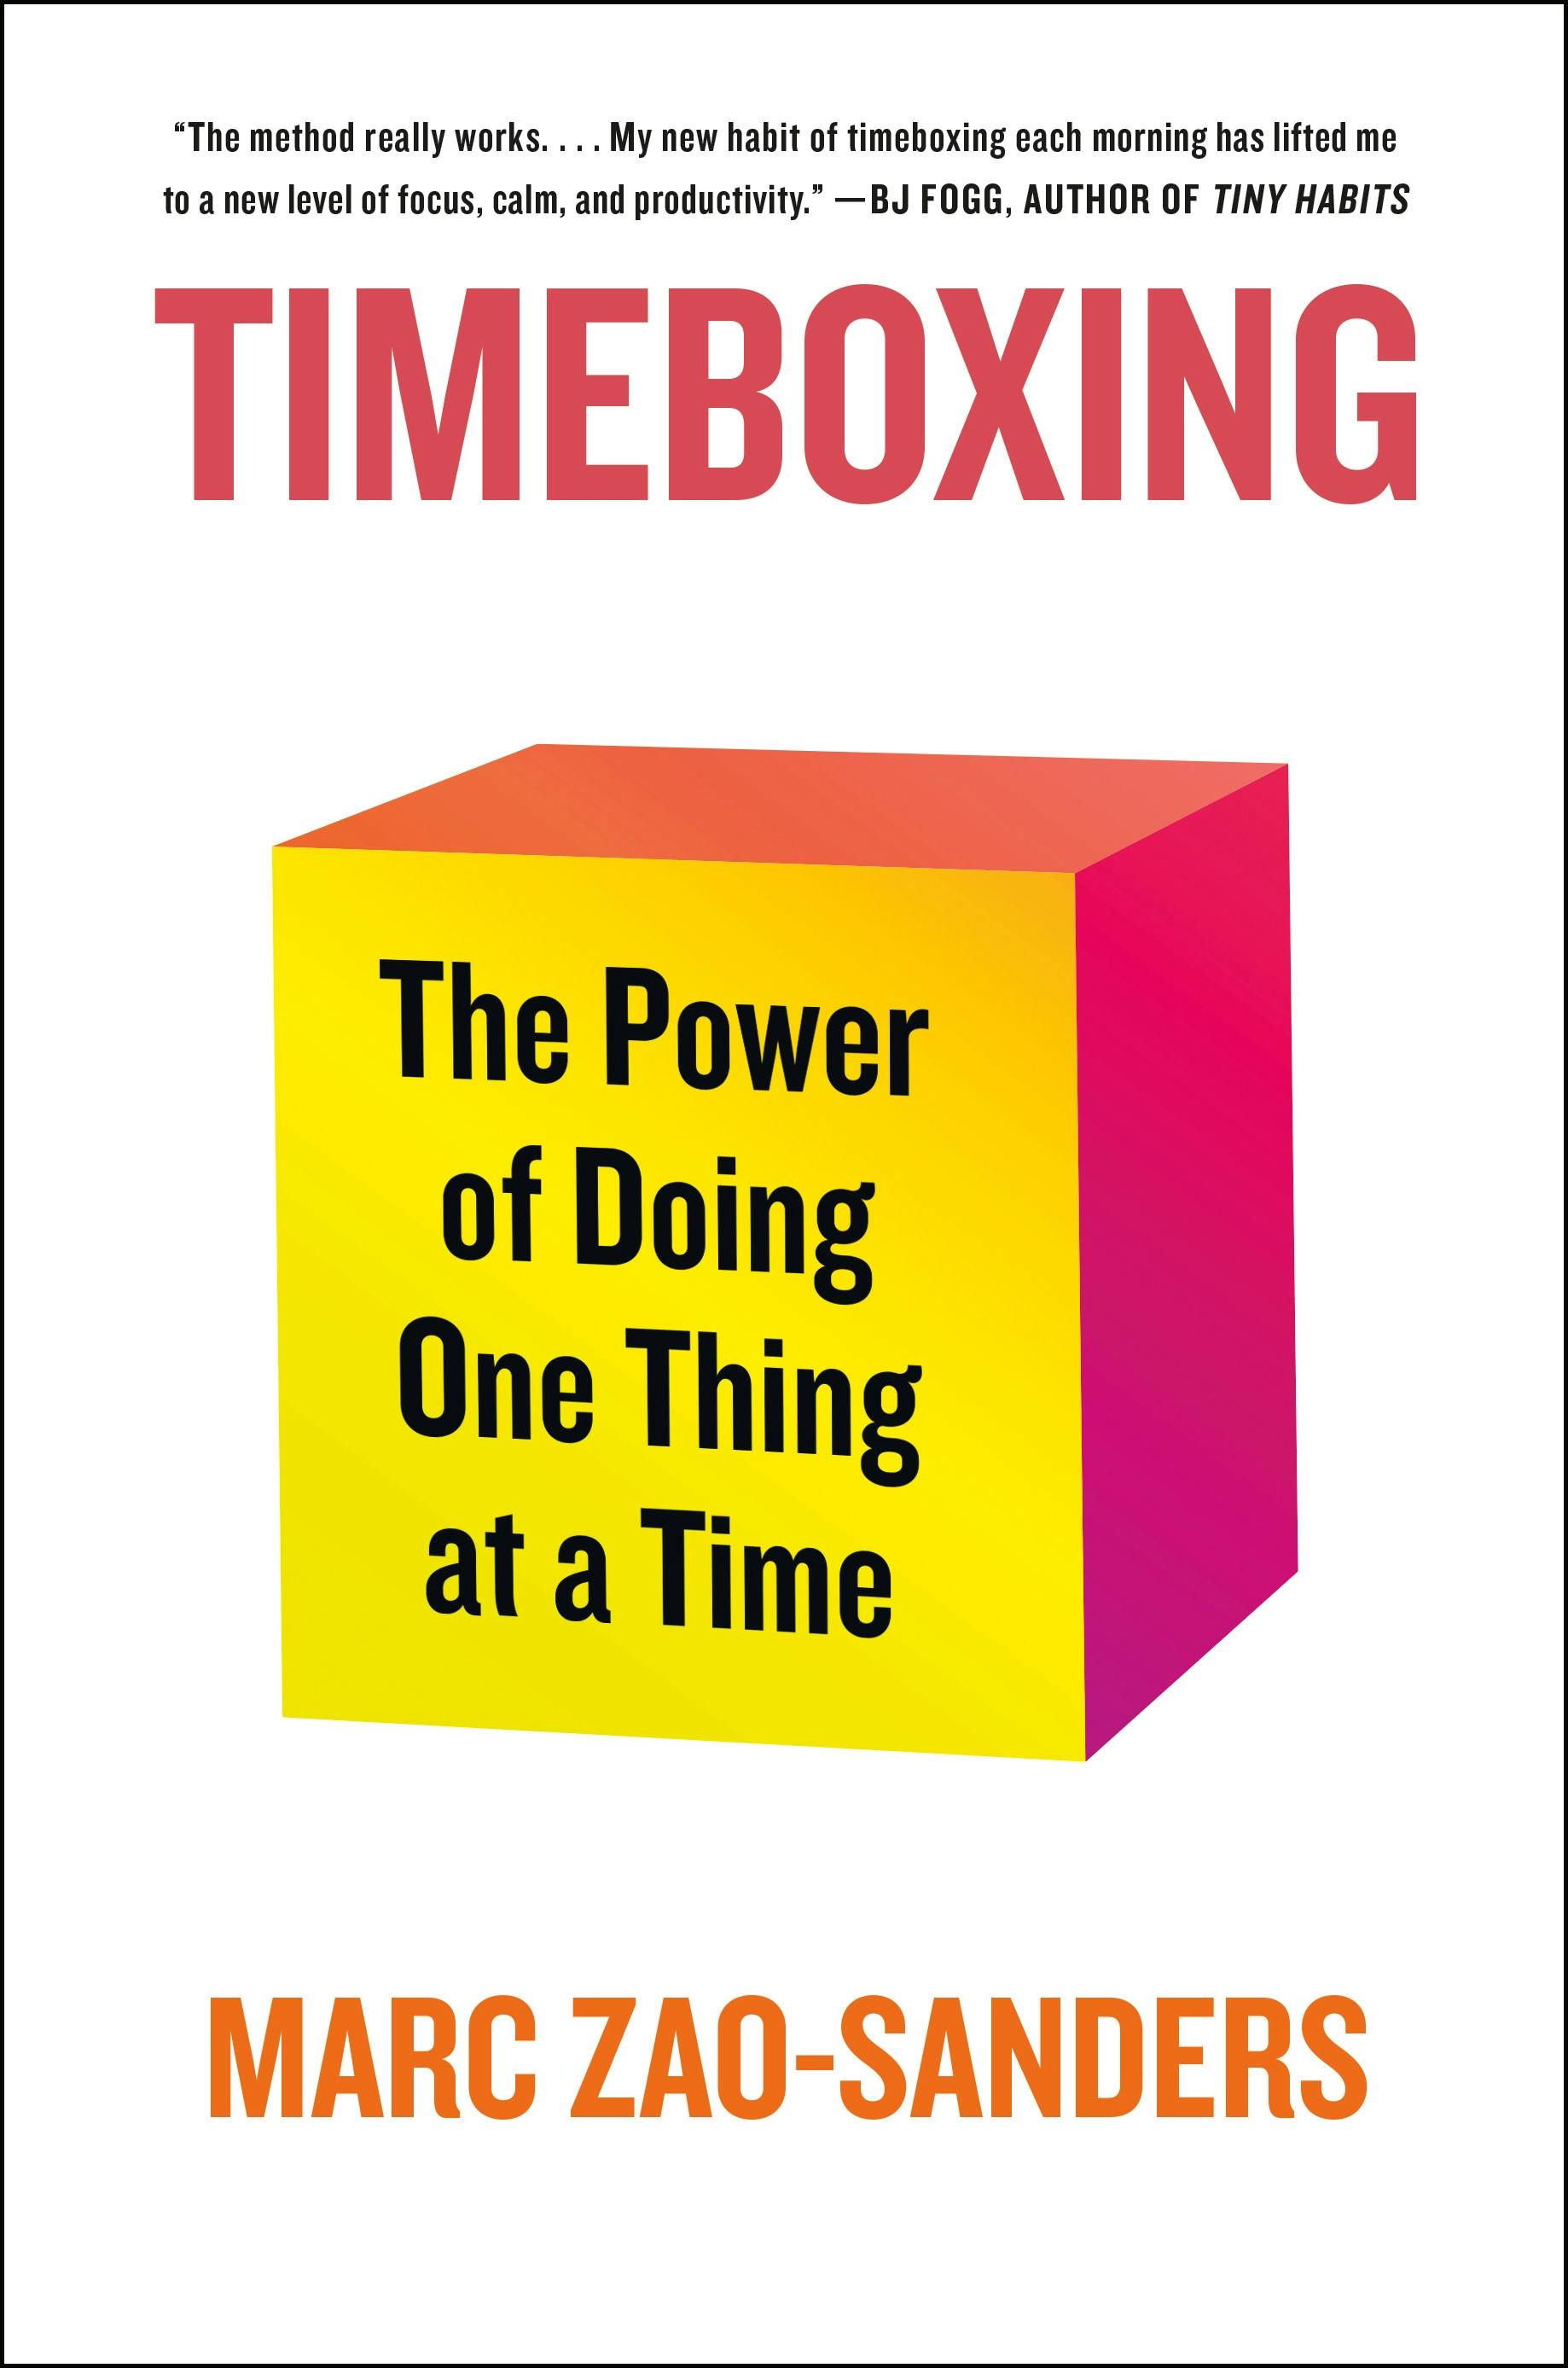 Describes for Timeboxing by authors